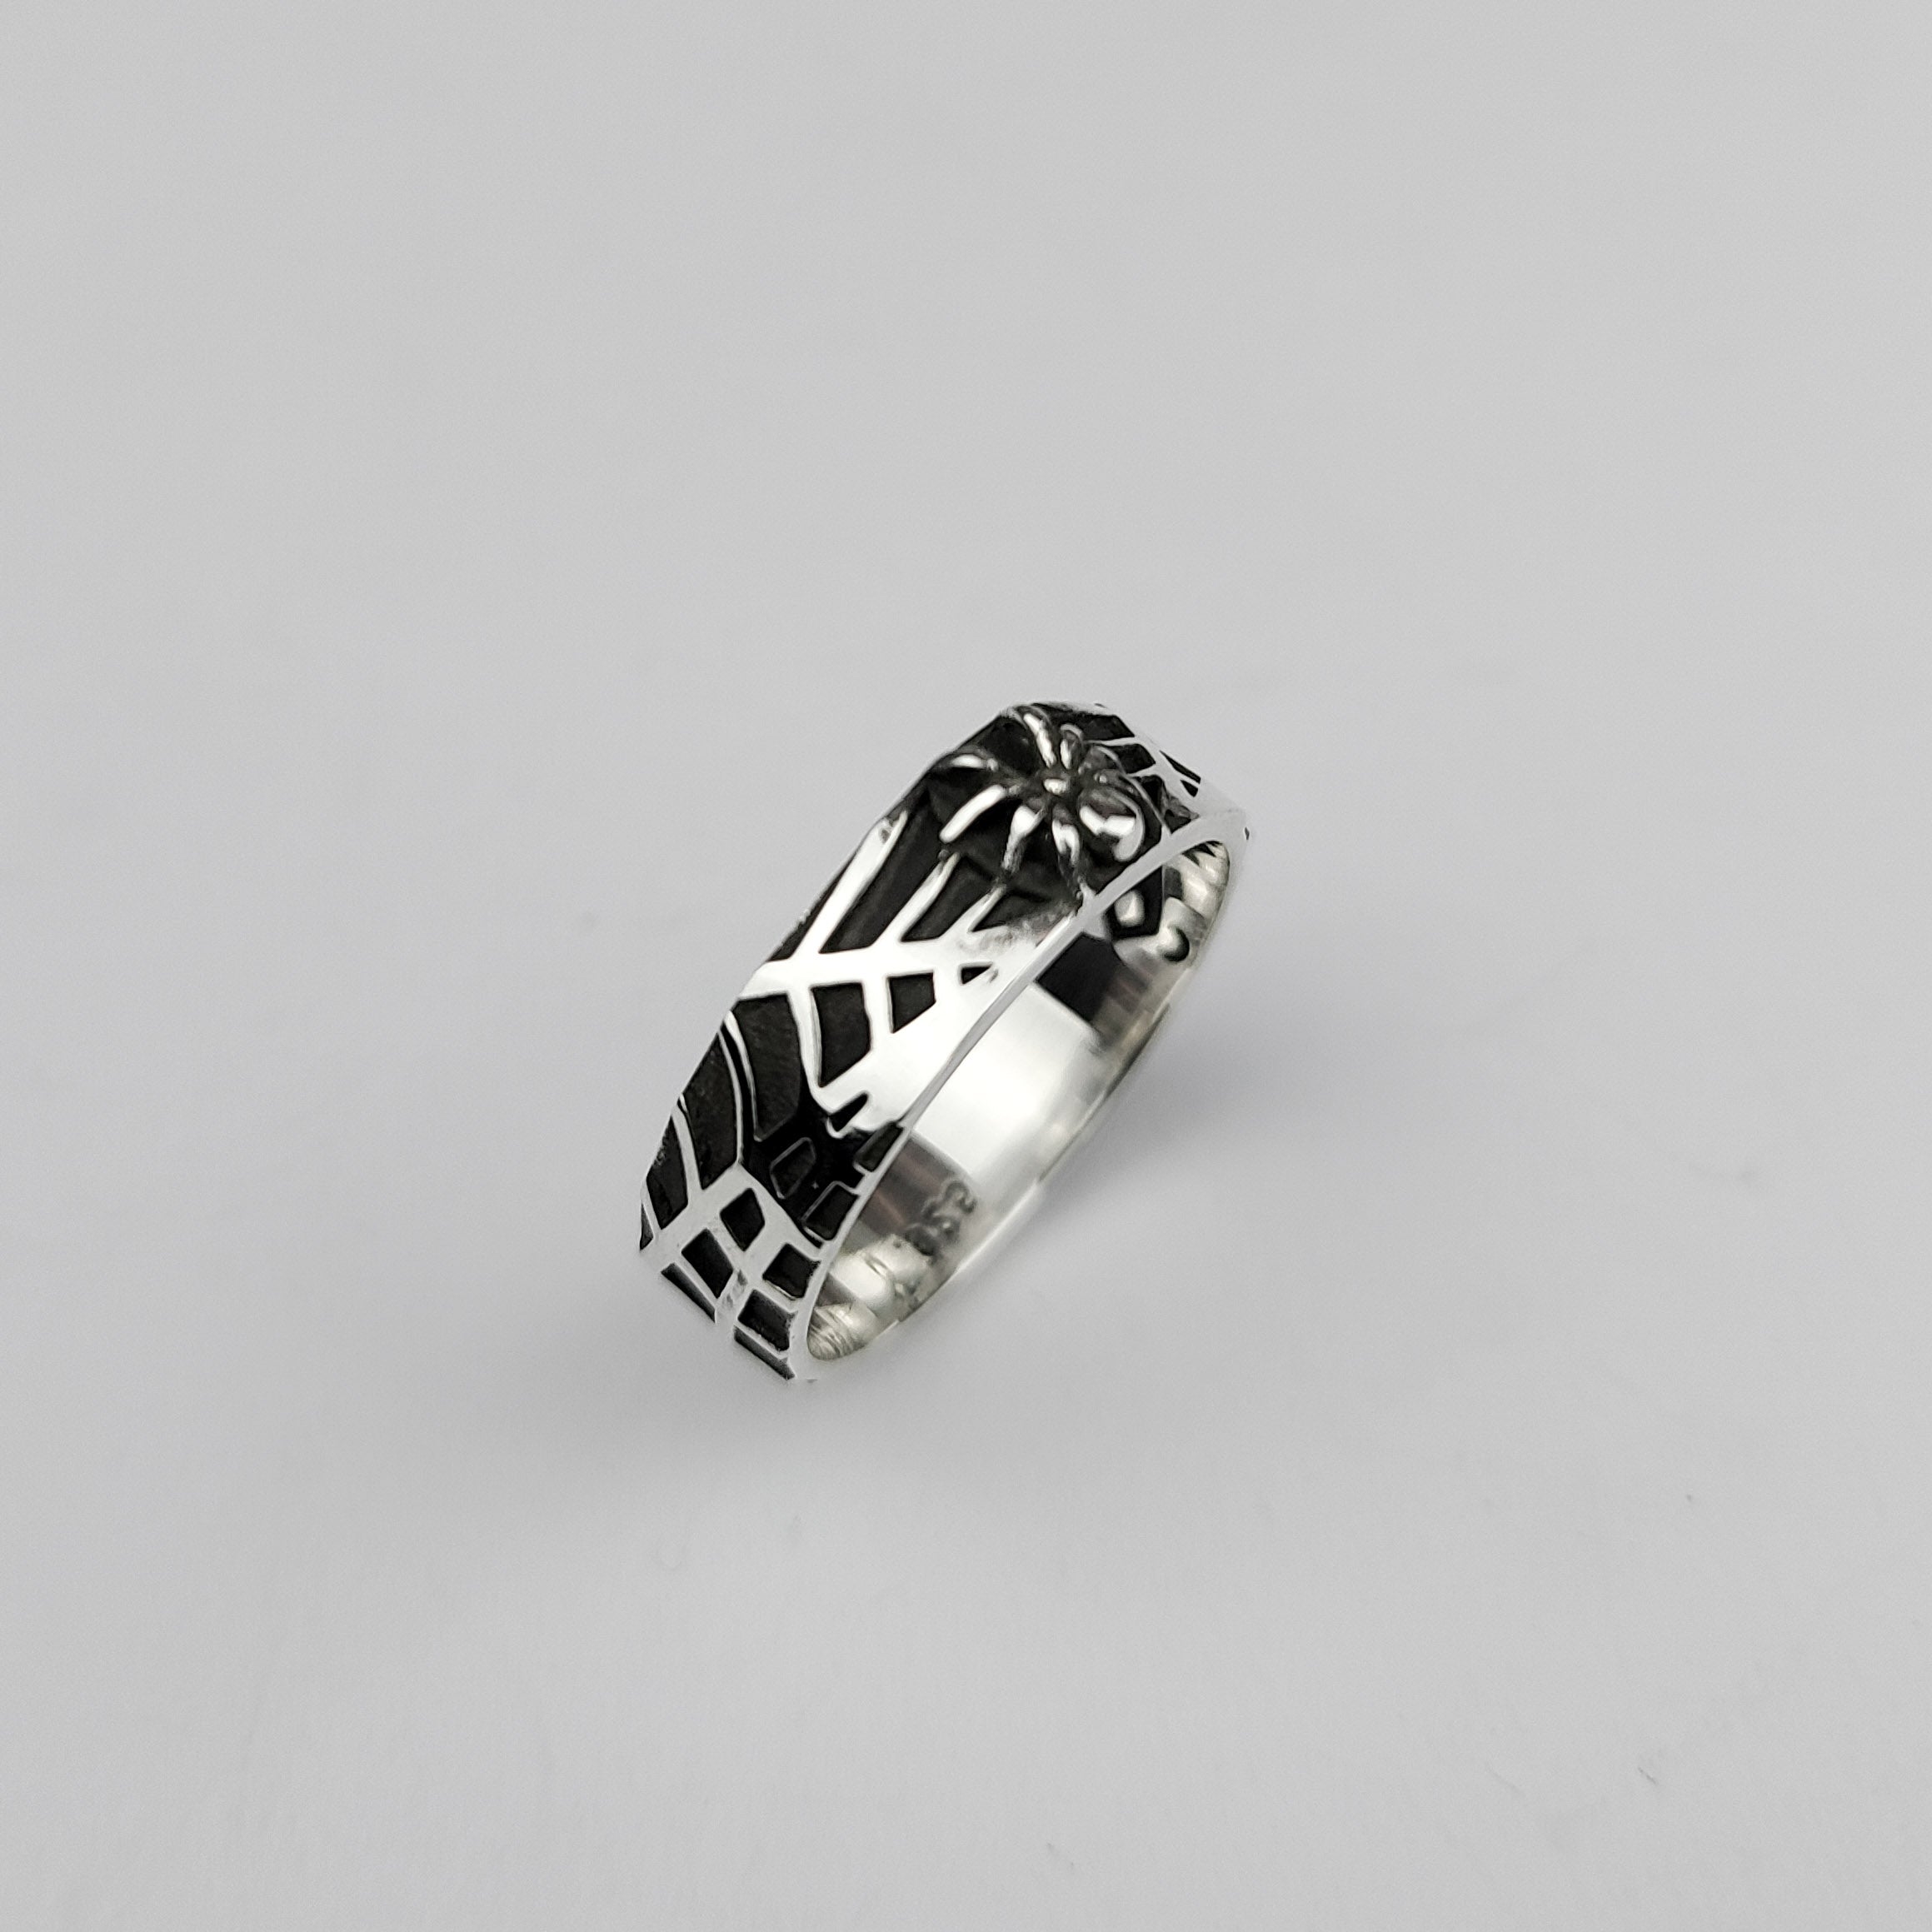 Spider and Spider Web Ring Band